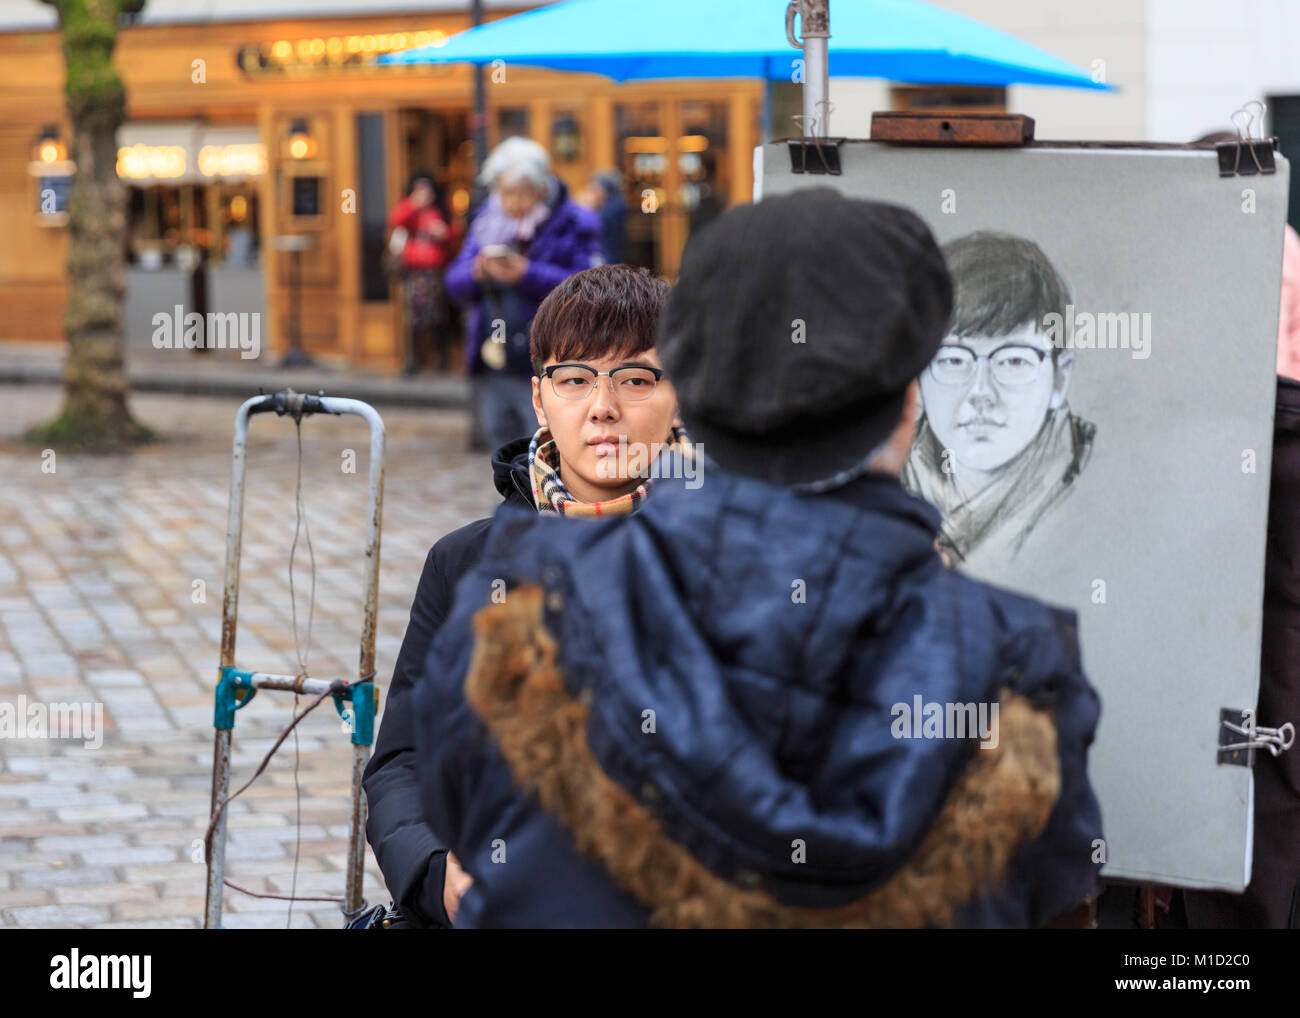 A painter sketches a young man on Place du Tertre, the famous artists square and tourist attraction in Montmartre, Paris Stock Photo